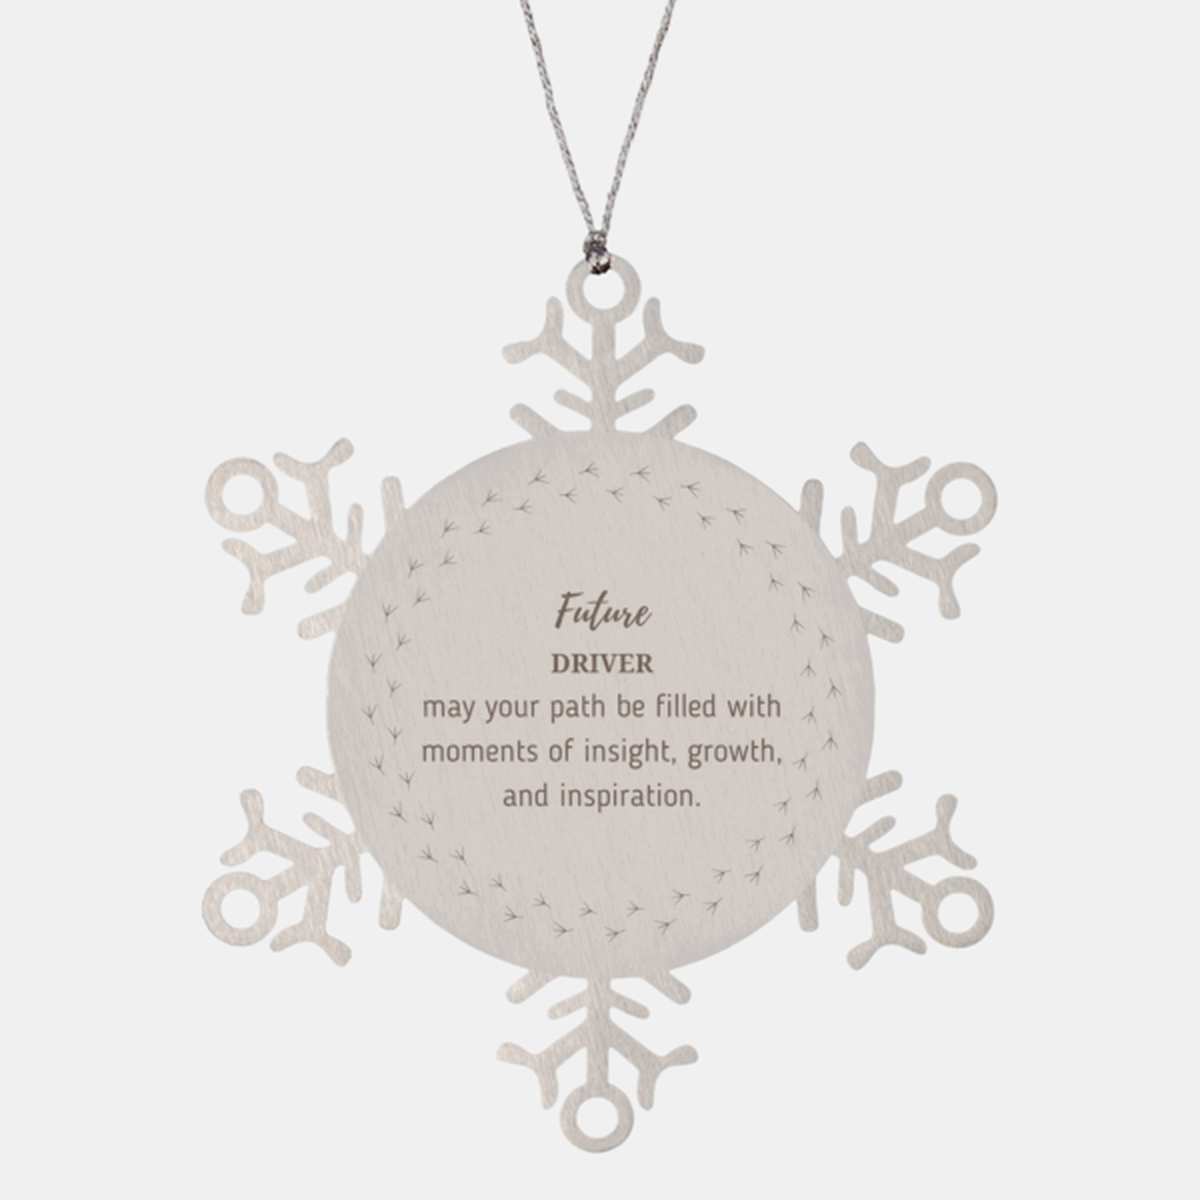 Future Driver Gifts, May your path be filled with moments of insight, Graduation Gifts for New Driver, Christmas Unique Snowflake Ornament For Men, Women, Friends